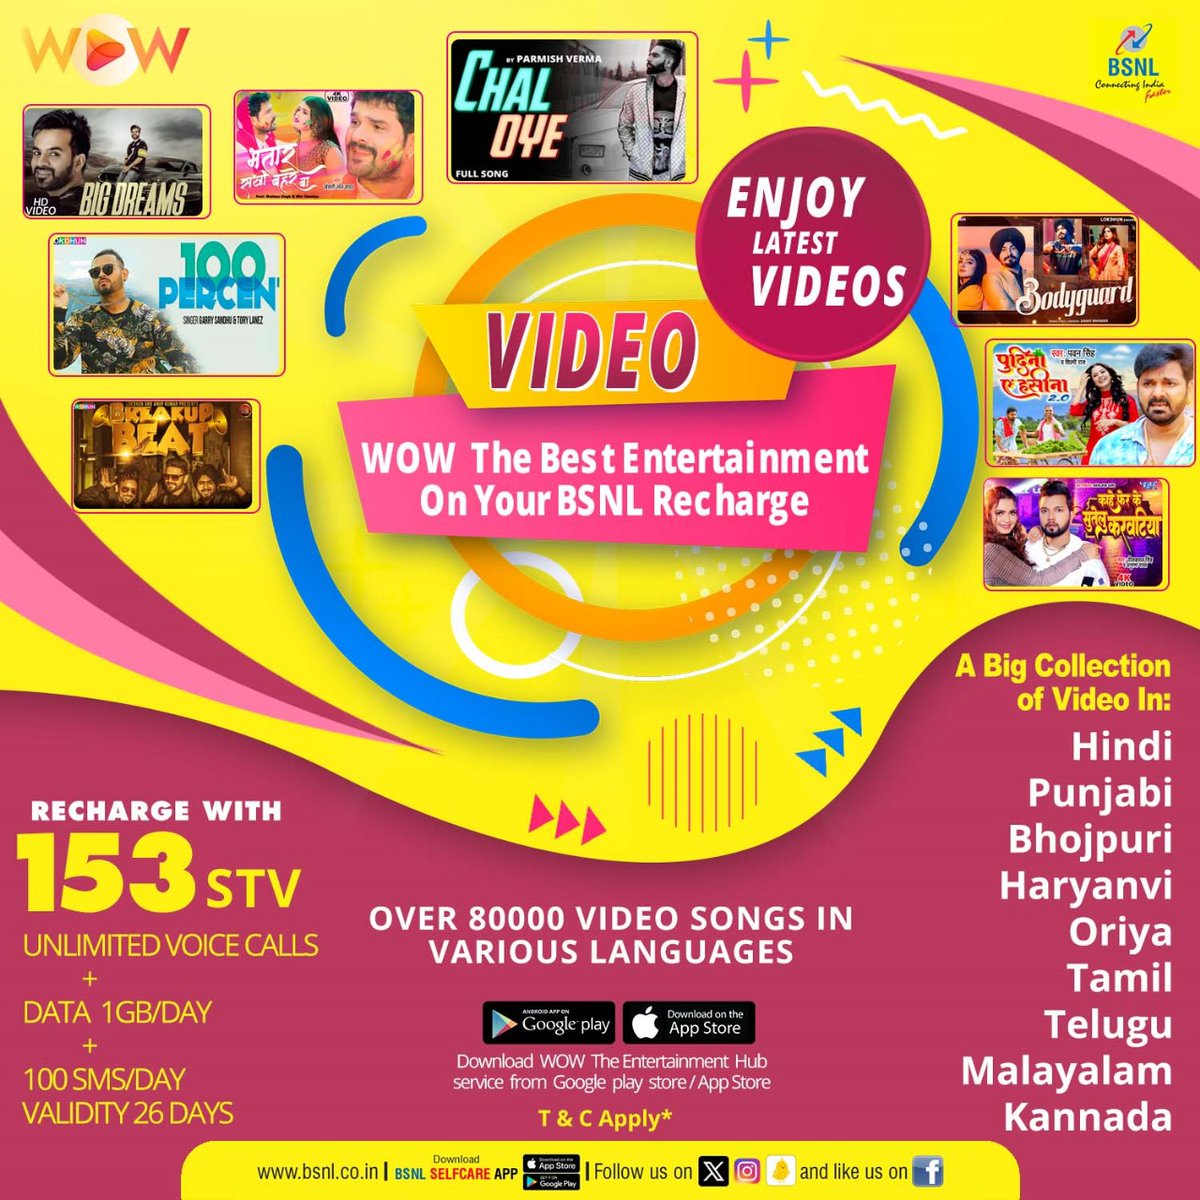 Indulge in entertainment diversity! BSNL's #PV153 grants access to over 80,000 videos in numerous languages on #Wow. #RechargeNow: bit.ly/STV0153 (For NZ,WZ & EZ), bit.ly/153SZ (For SZ) #BSNL #RechargeNow #BSNLSelfcareApp #WowEntertainment